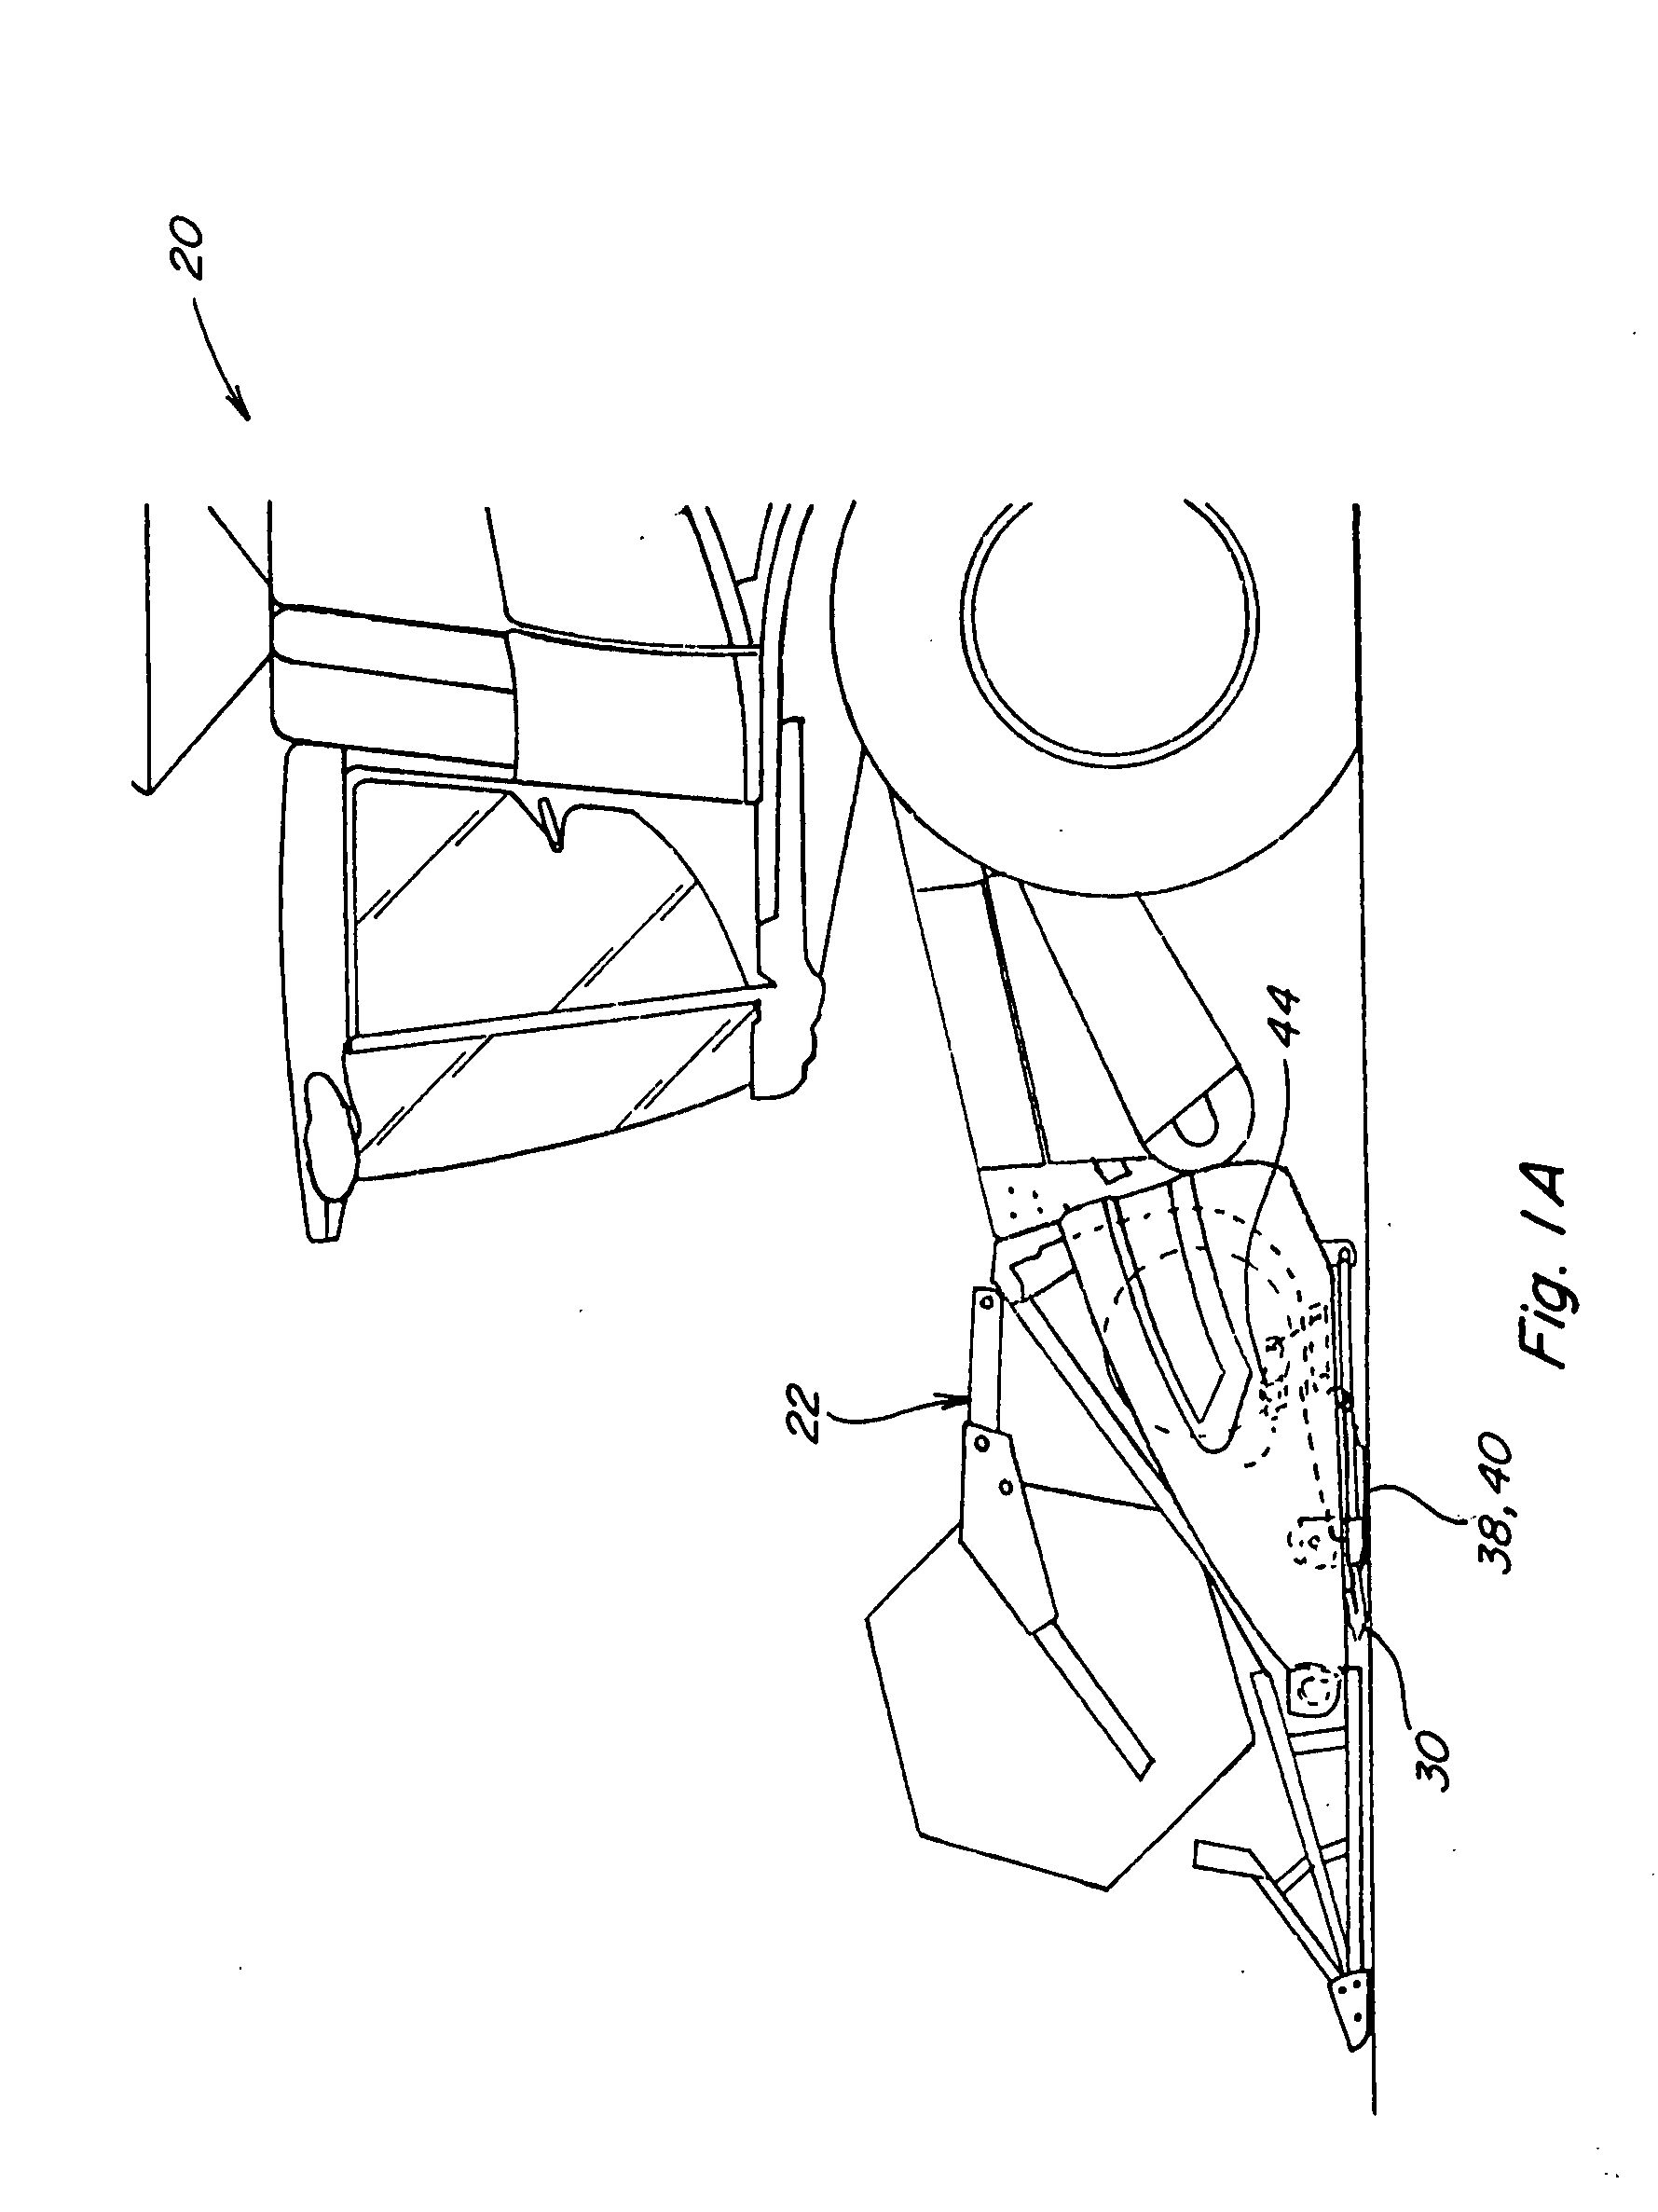 Automatic control system for a header of an agricultural harvesting machine and method of operation of the same